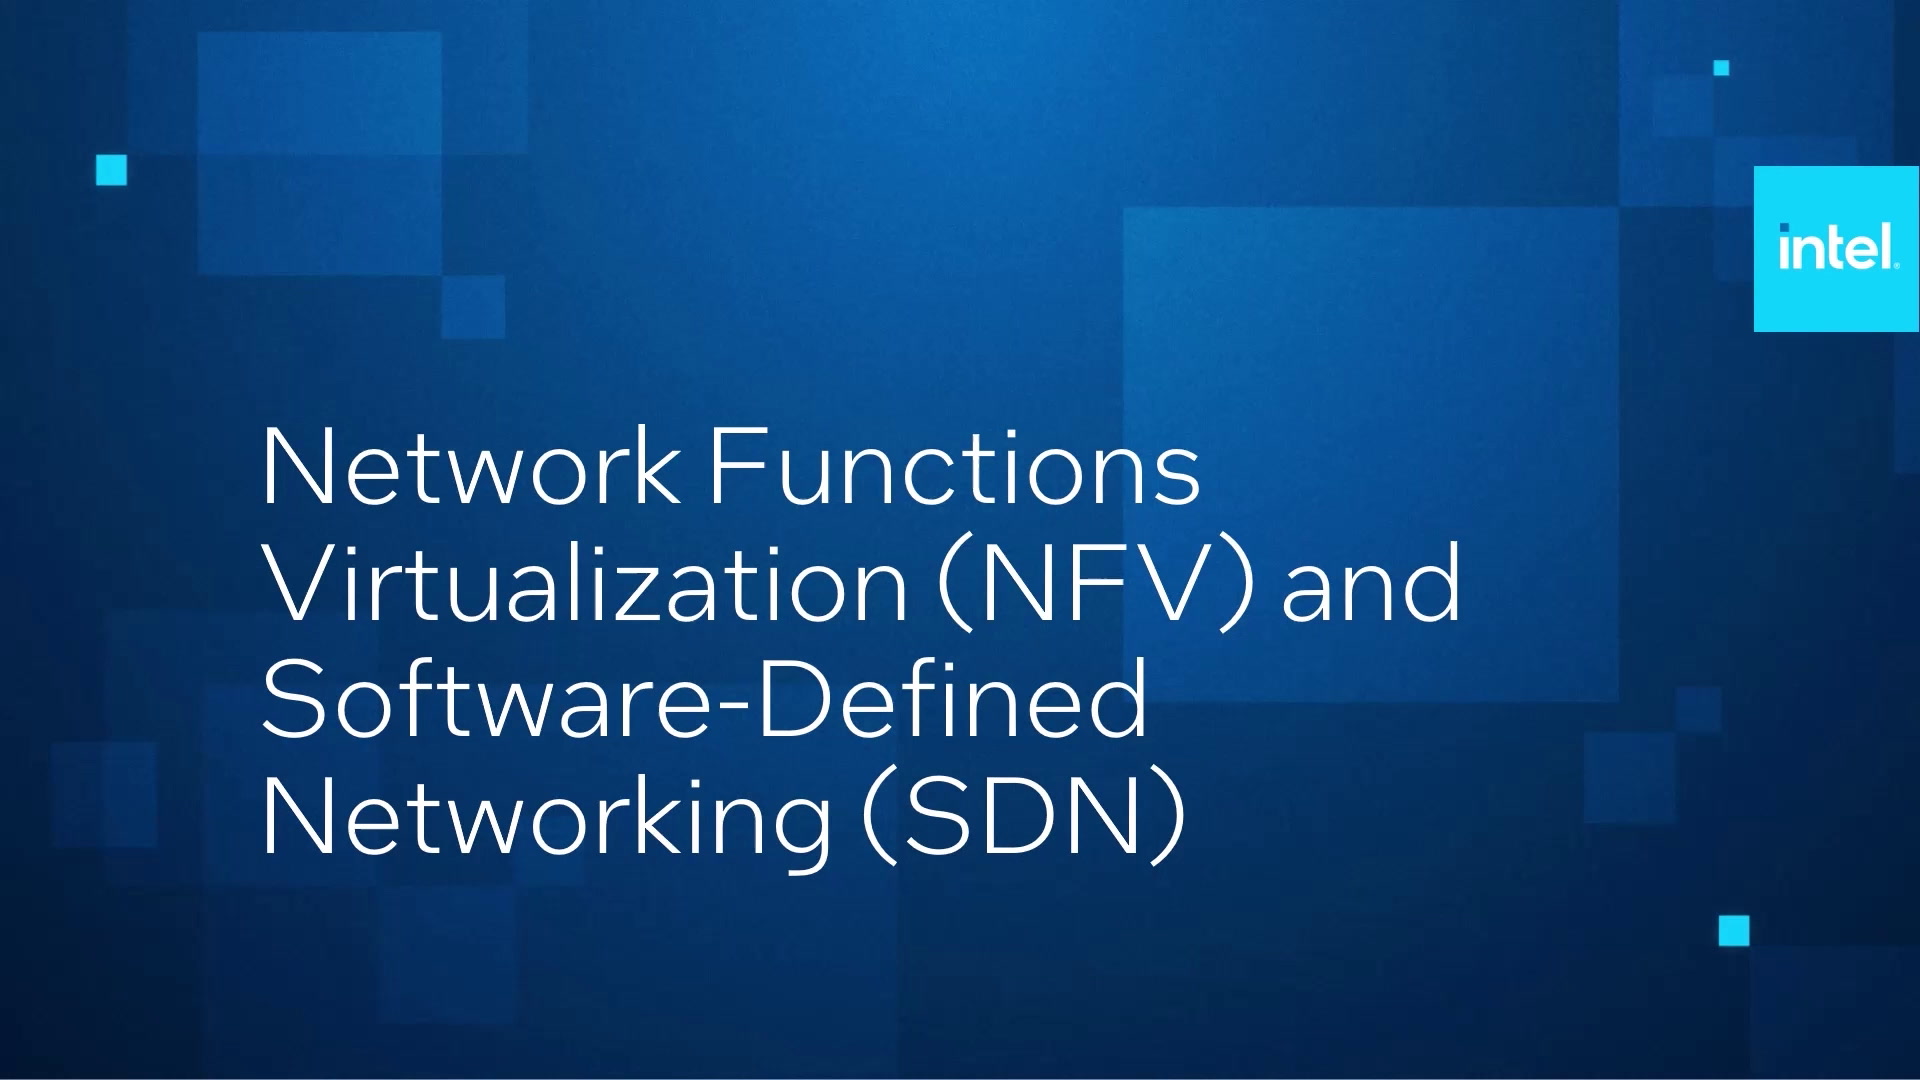 Network Functions Virtualization and Software Defined Networking